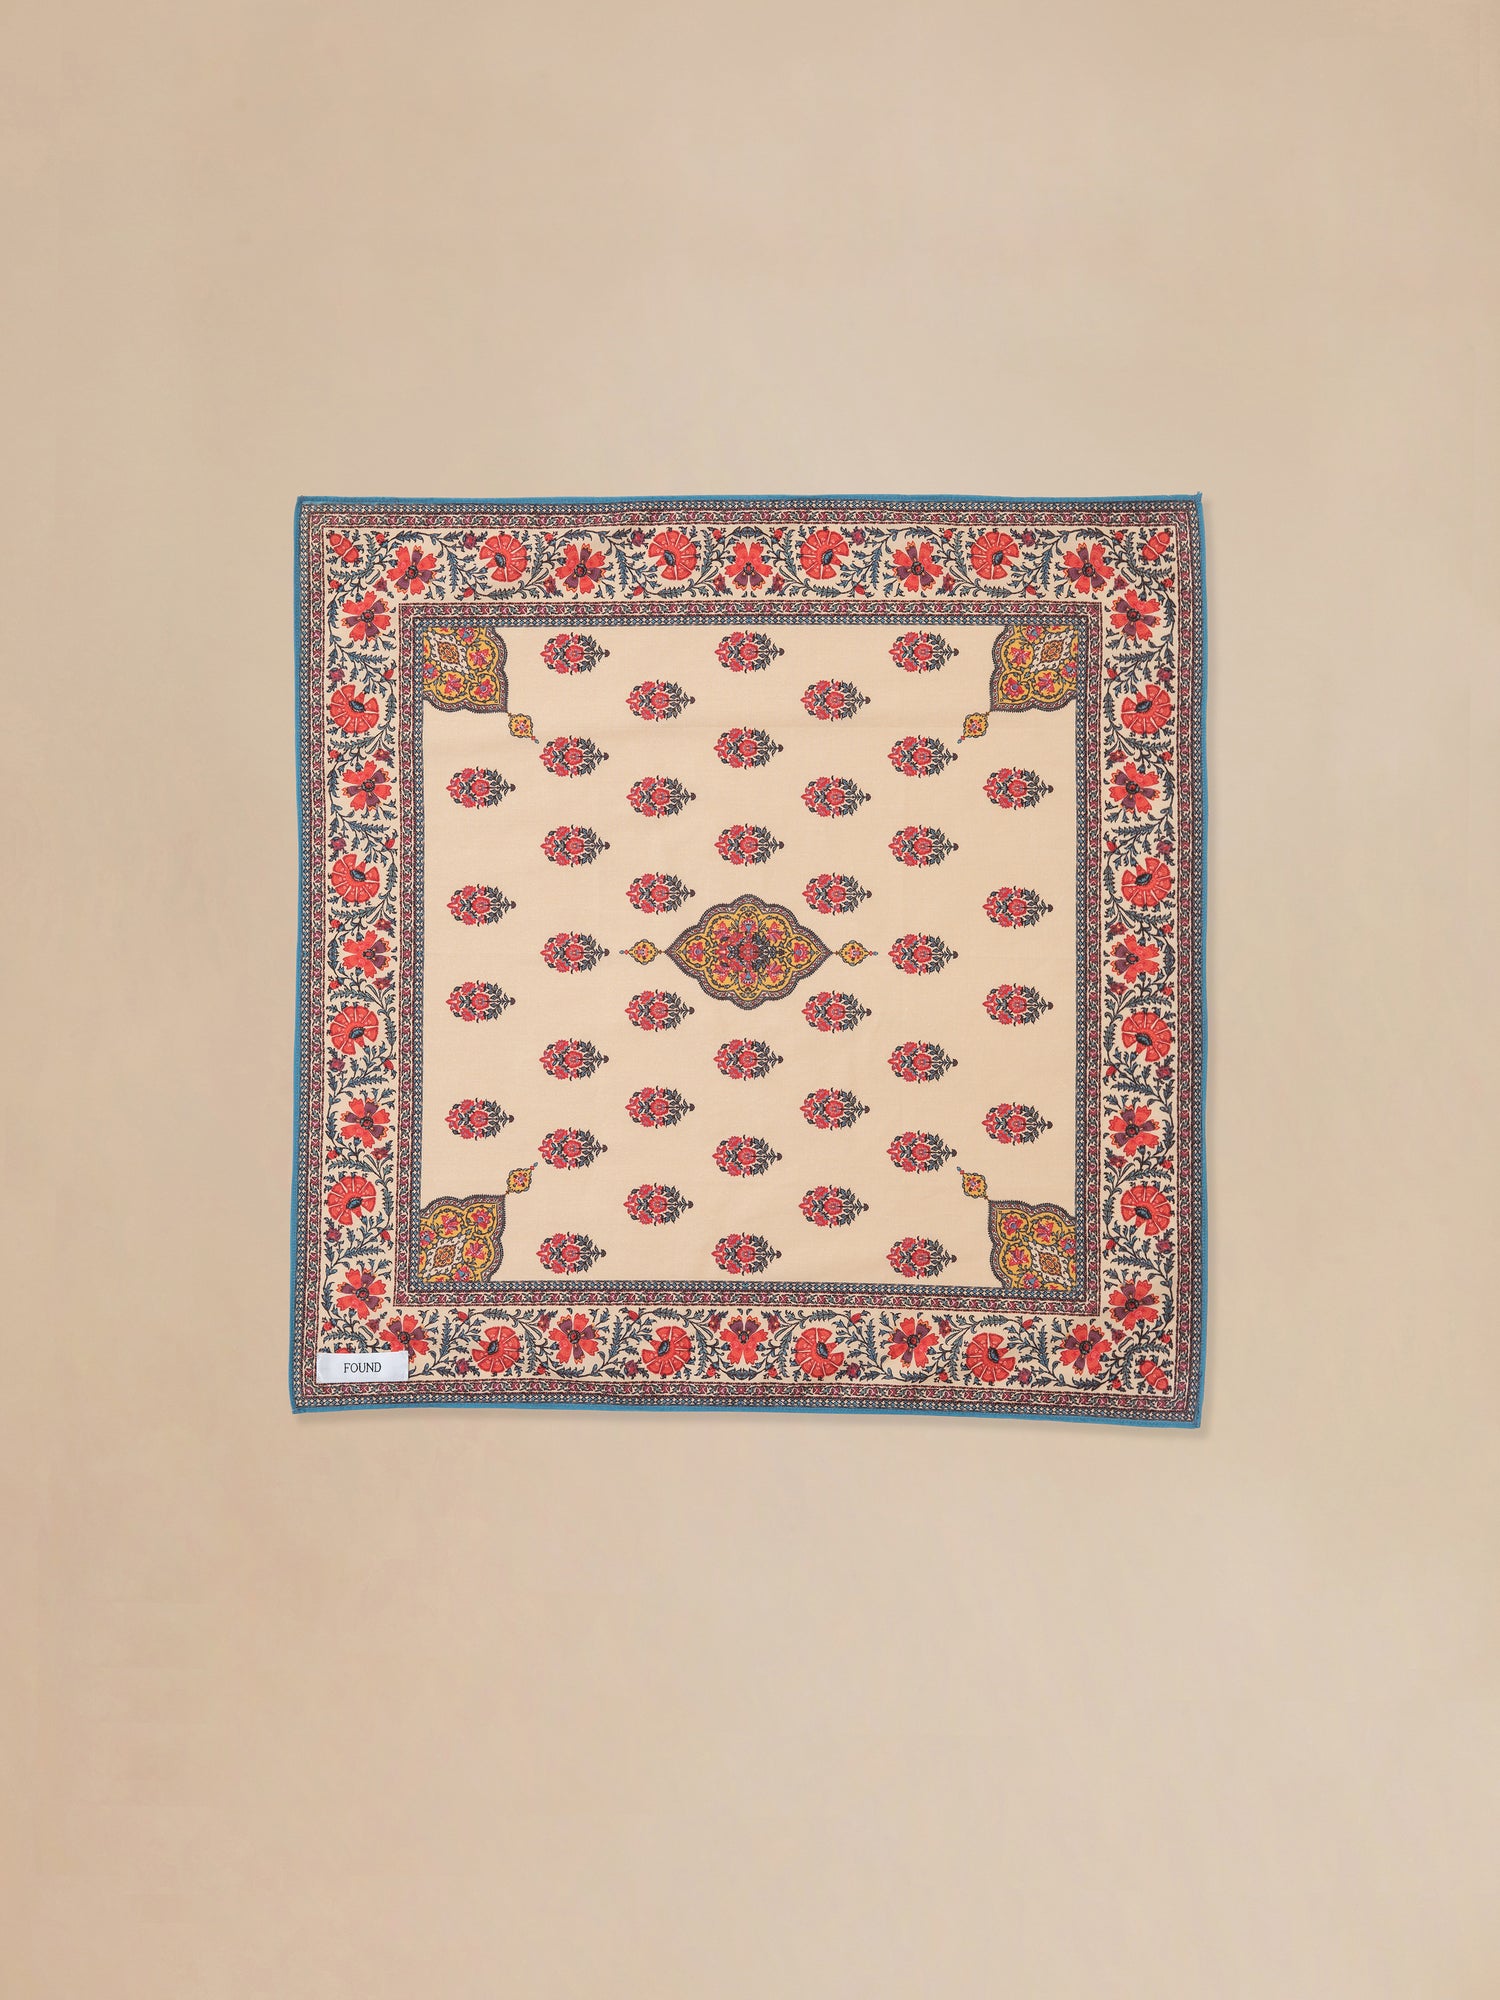 A beige and red Poinciana Bandana rug with an Indo-Aryan floral pattern by Found.